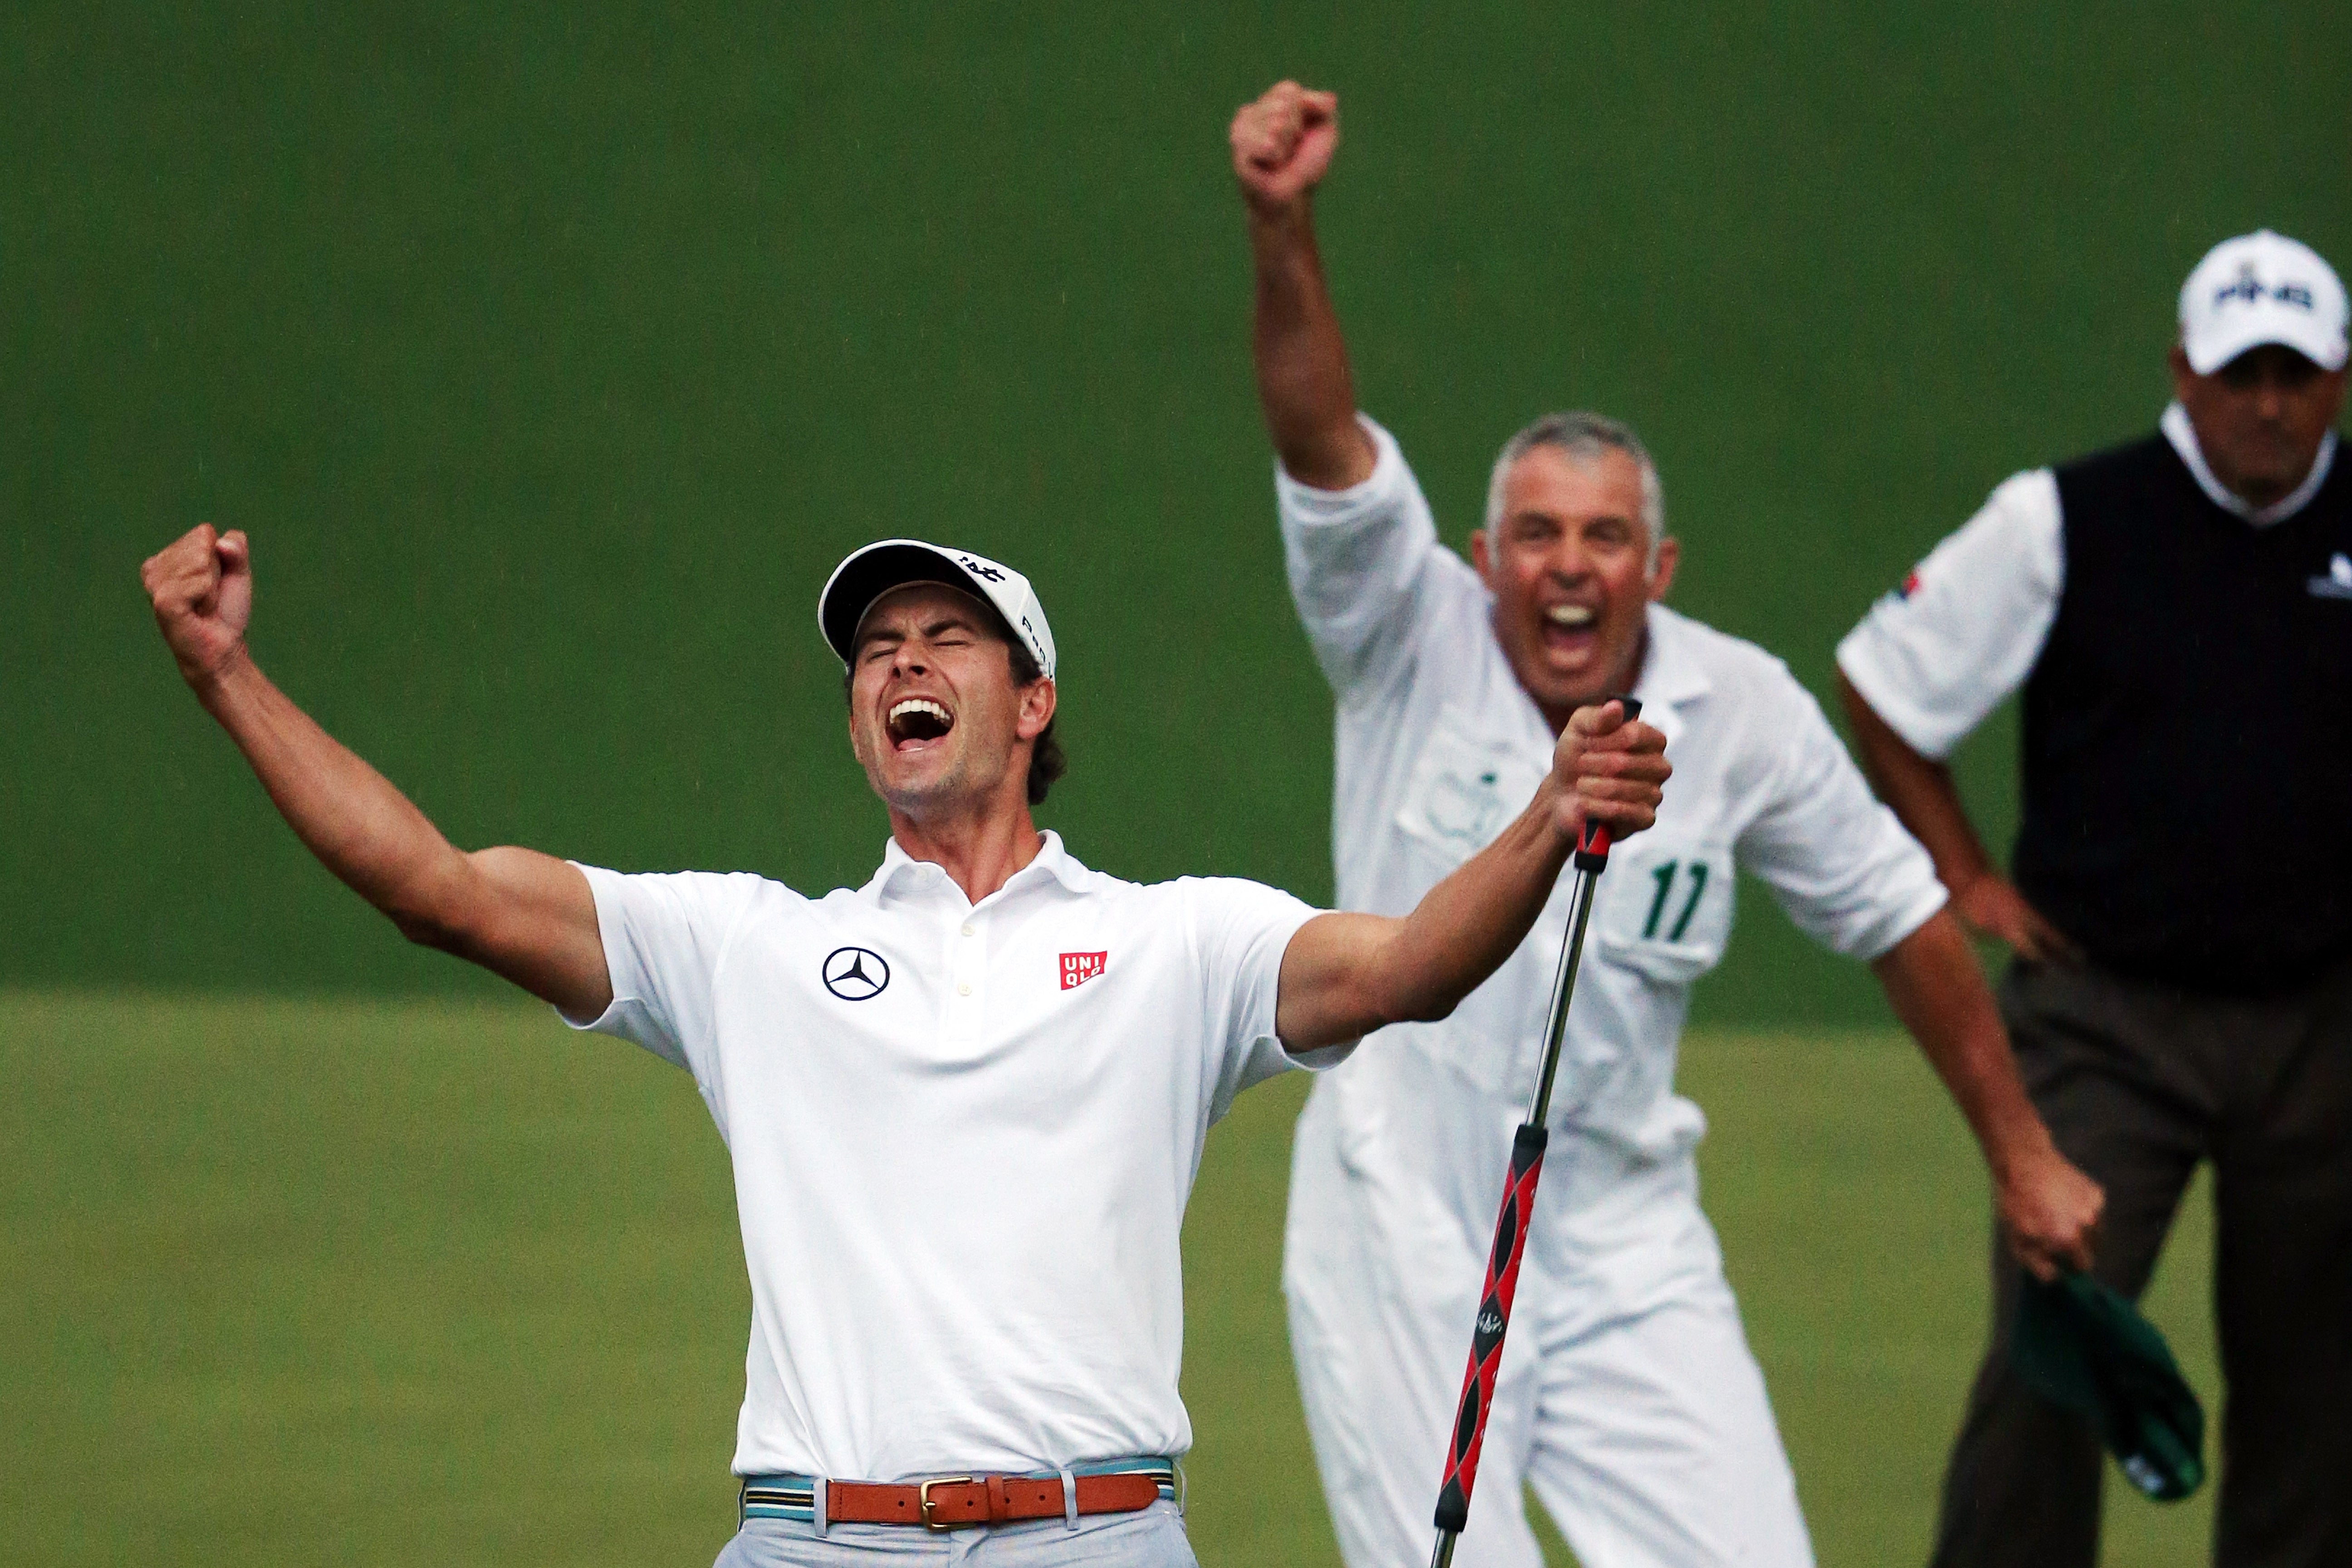 Cabrera would narrowly miss out on a second green jacket in 2013 to Adam Scott